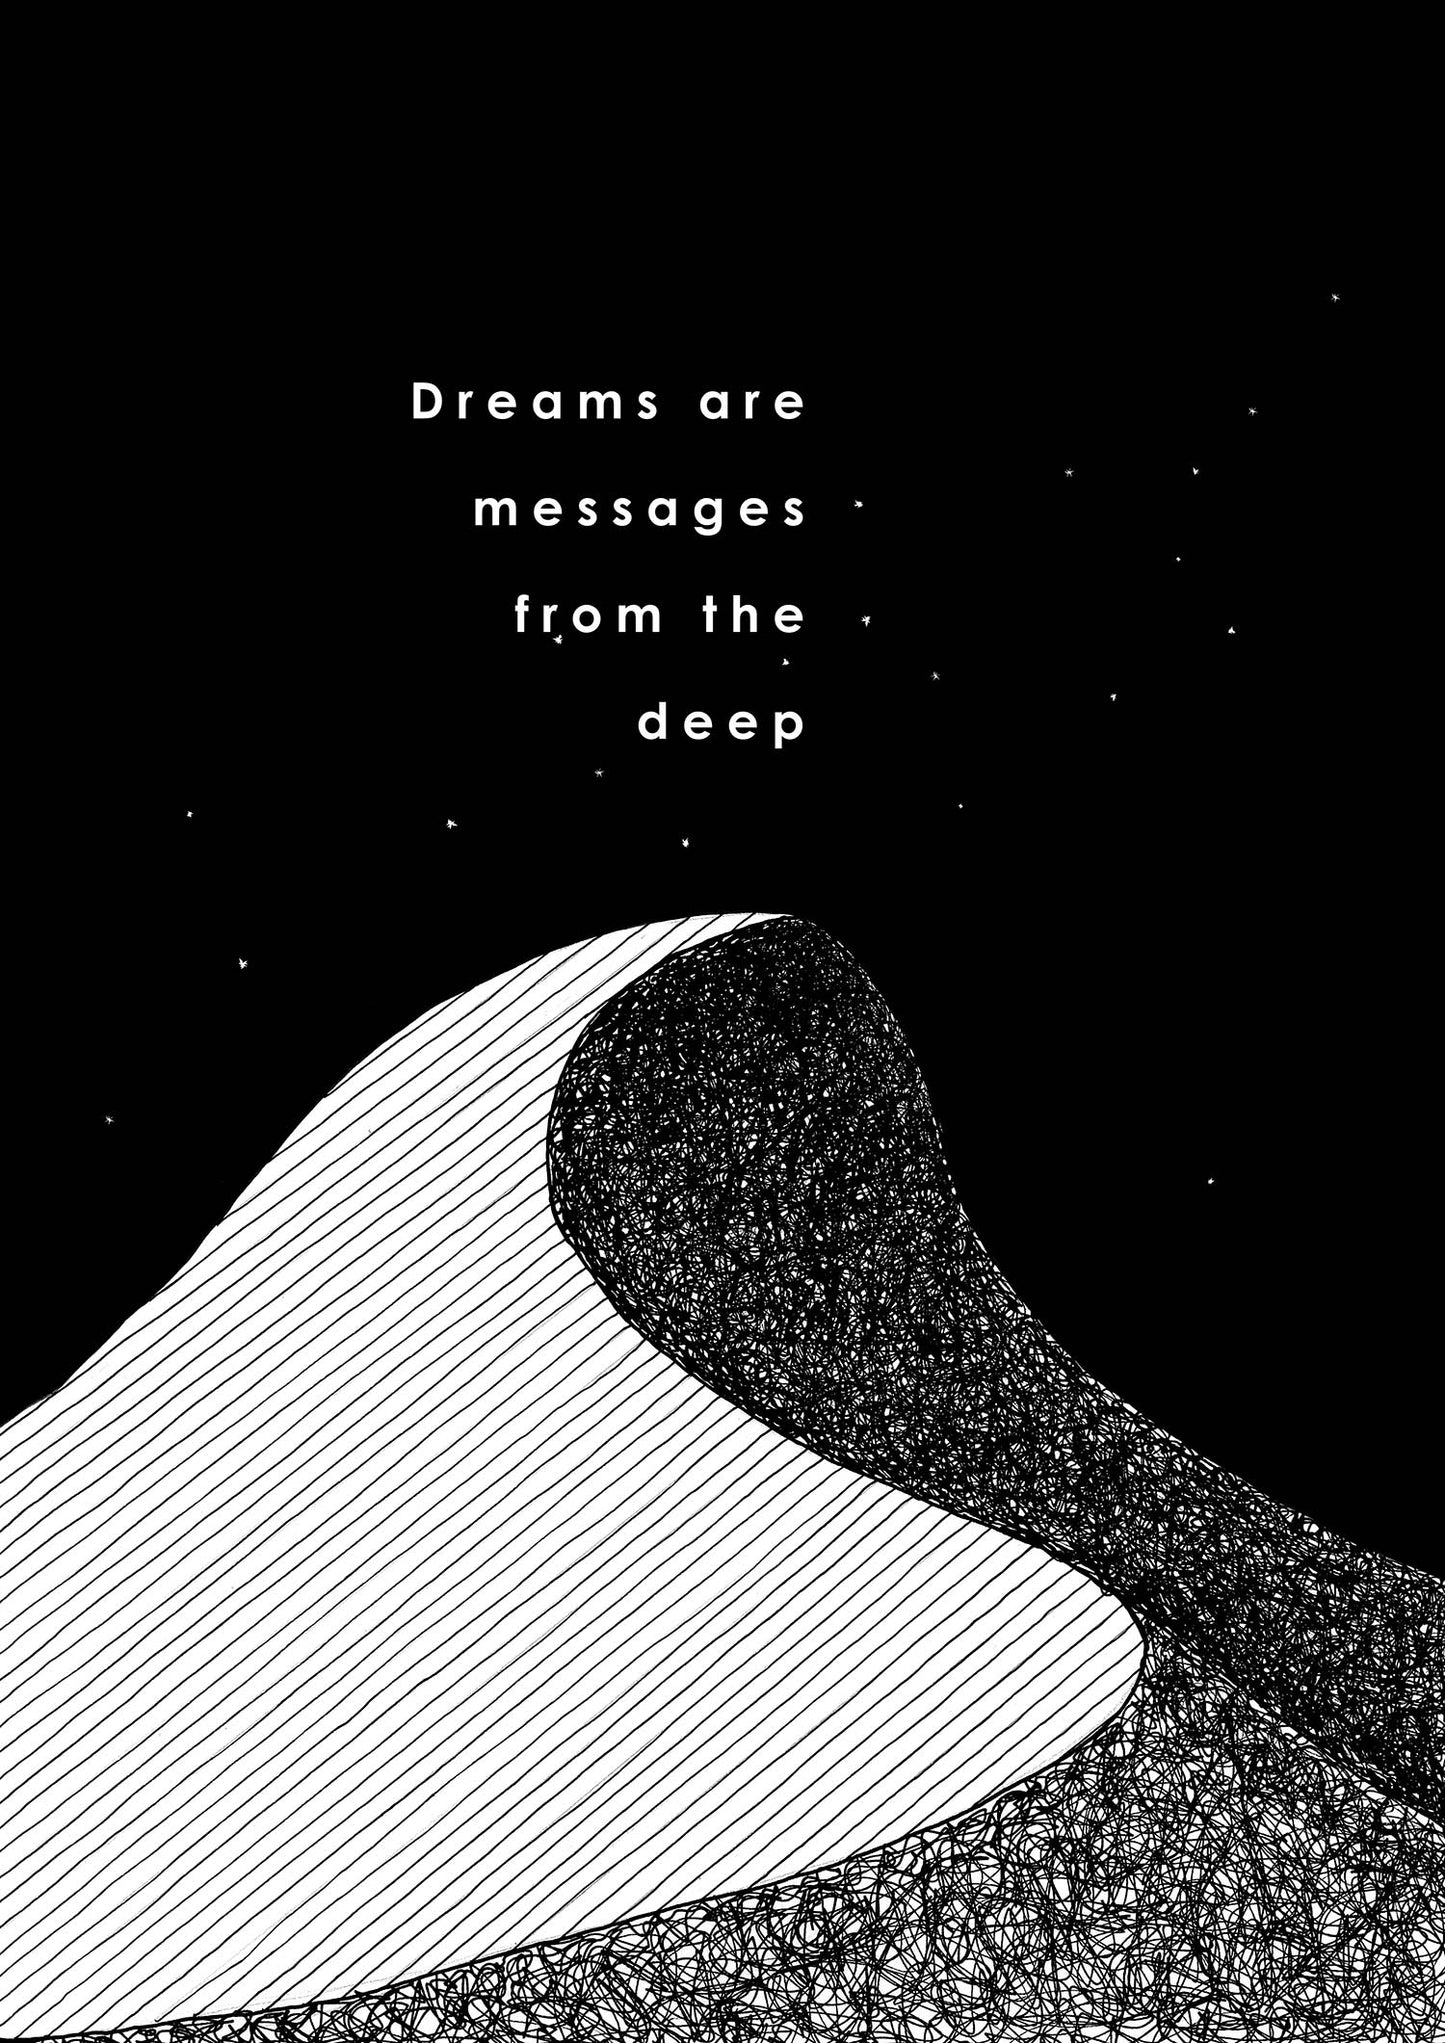 Dune Fanmade Quote Poster - Dreams are messages from the deep.